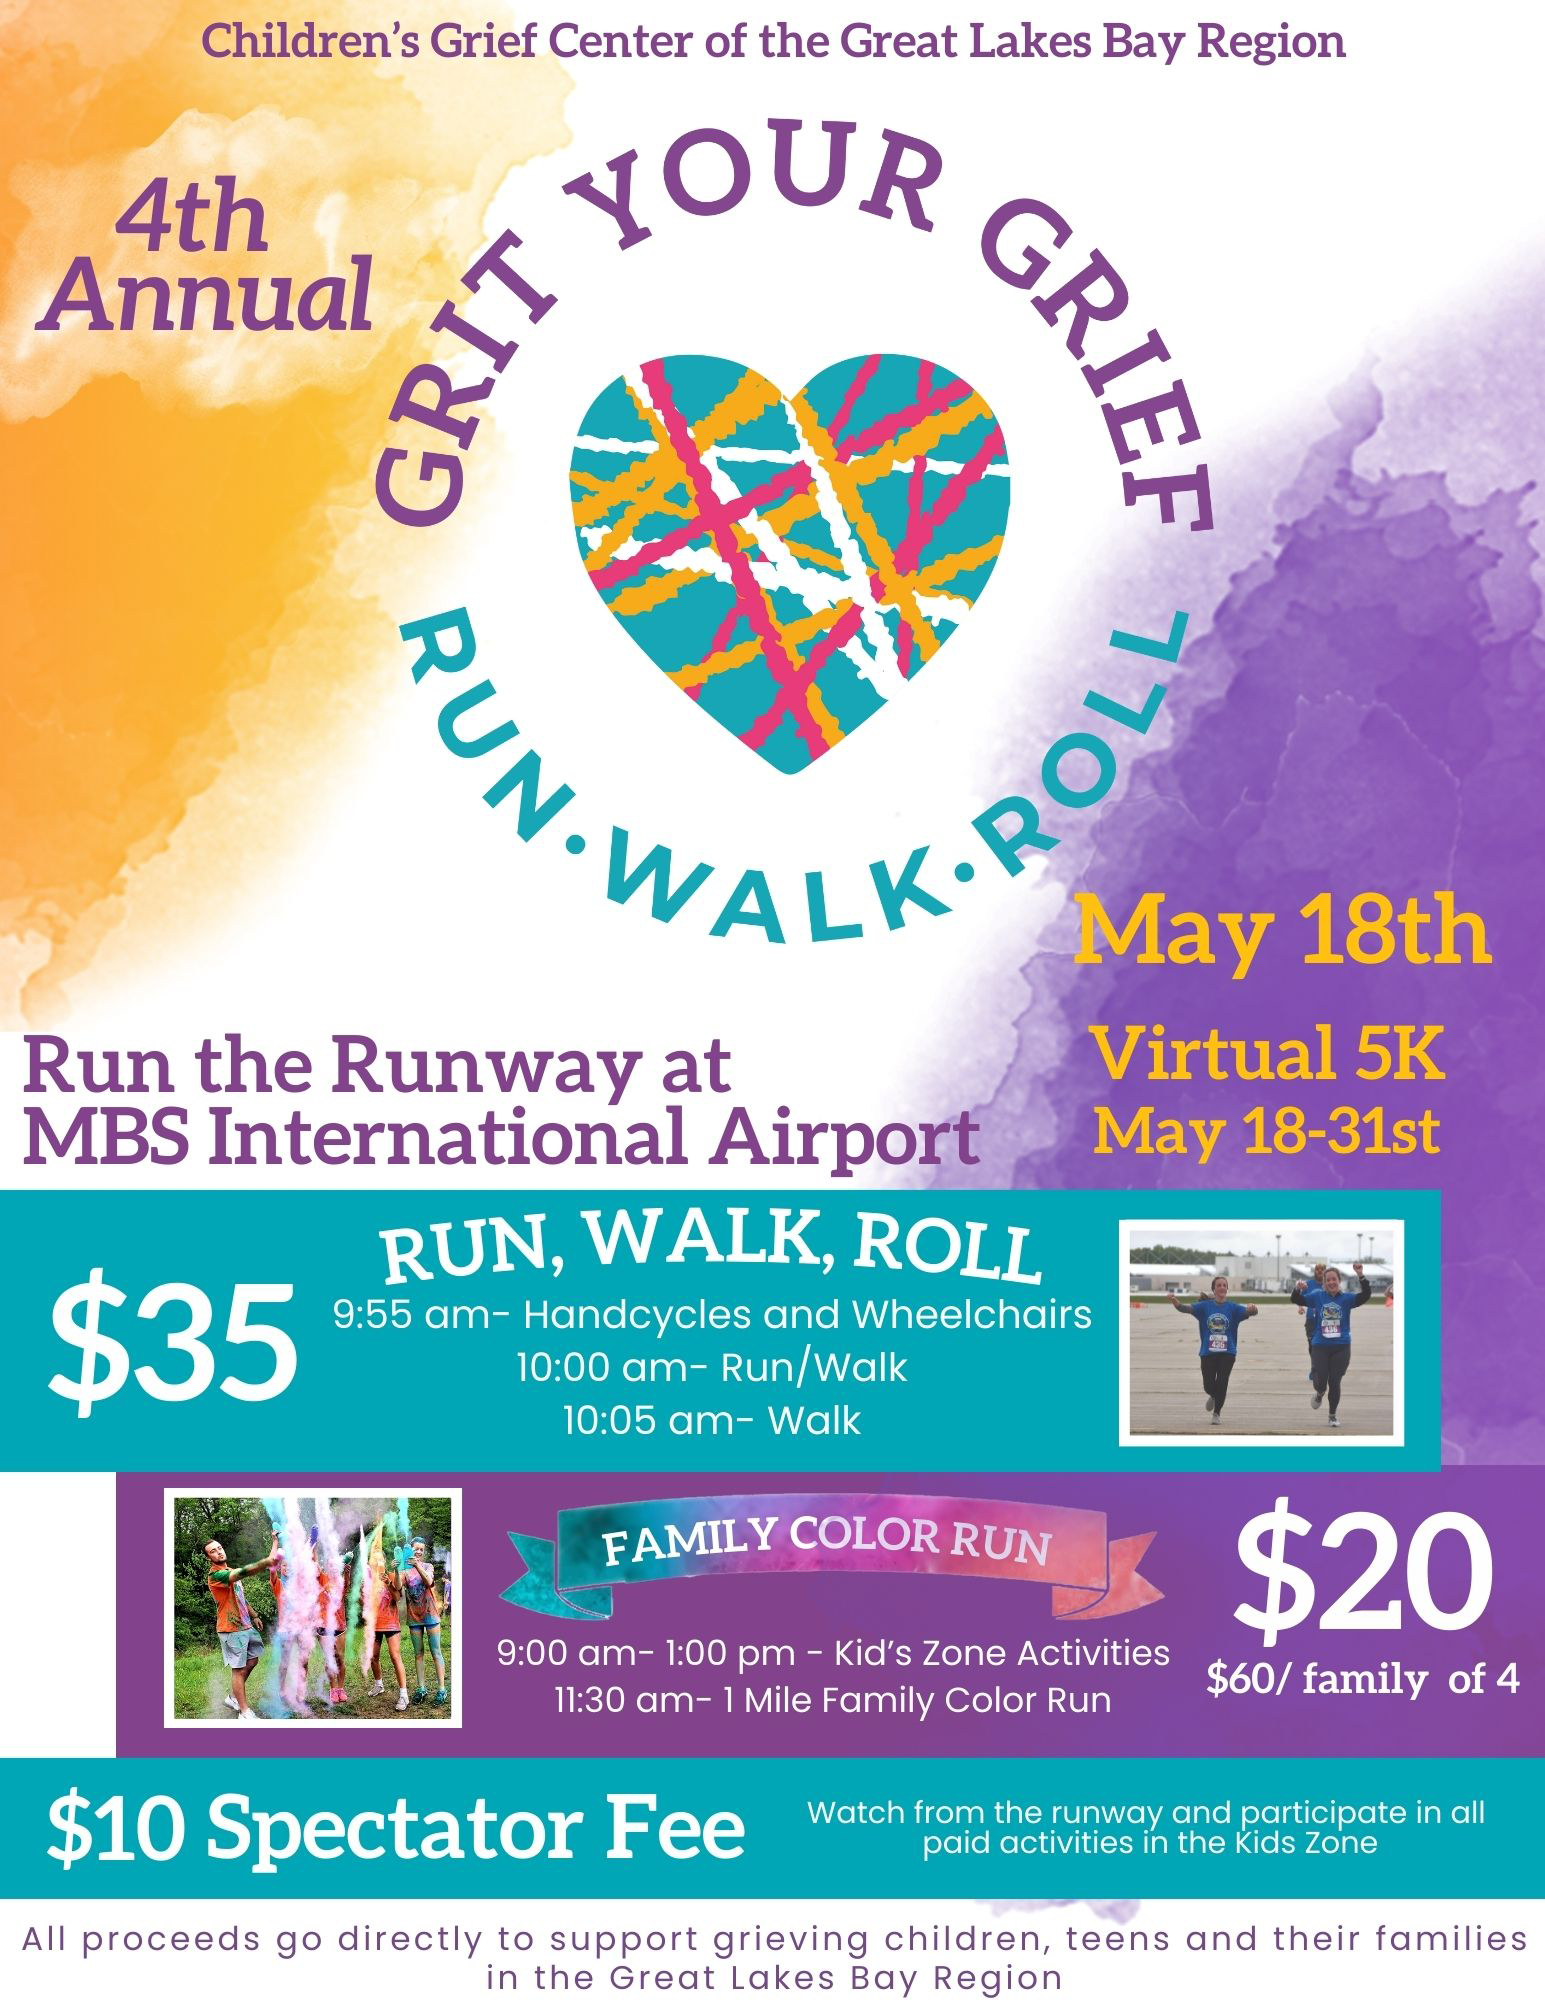 "Grit Your Grief" Run/Walk/Roll at MBS International Airport